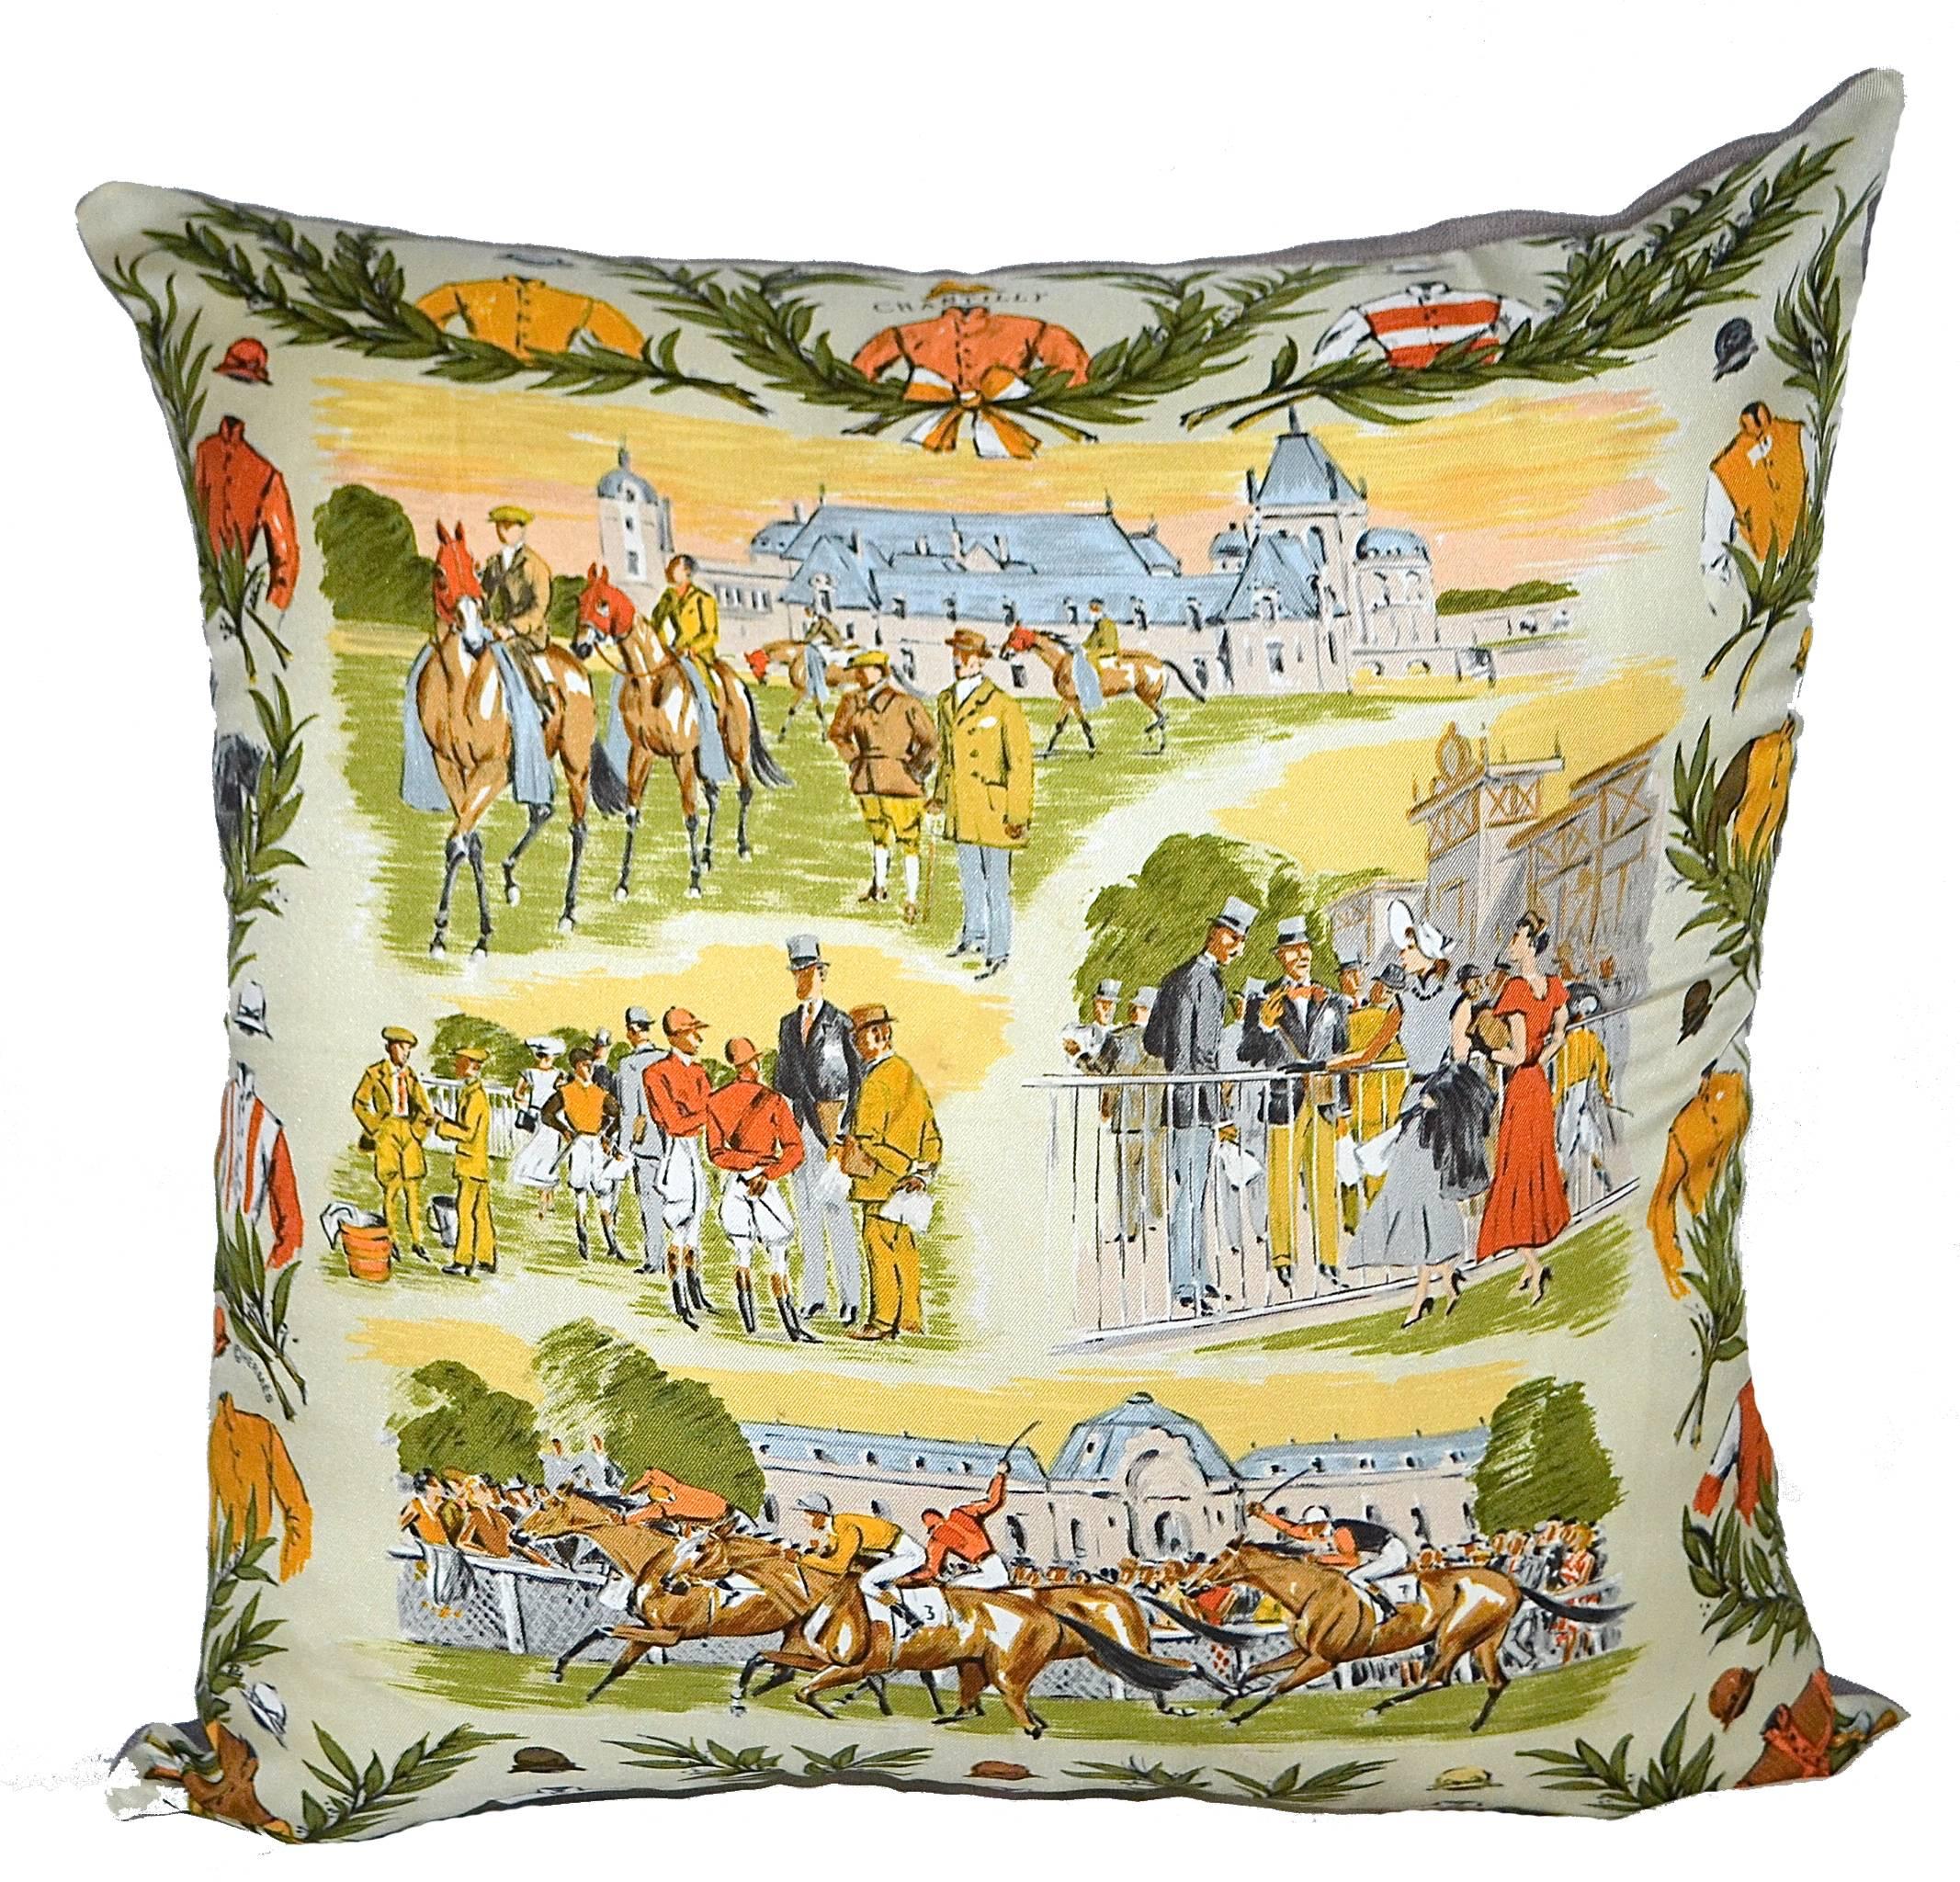 Guaranteed authentic HERMES Pre-owned Vintage silk scarf Newly custom Fabricated pillow. Satin, custom-made pillow interior.
Designed by Maurice Taquoy 
Design "Chantilly" 
Shades of Green & Gold.
Stitched edging and hidden